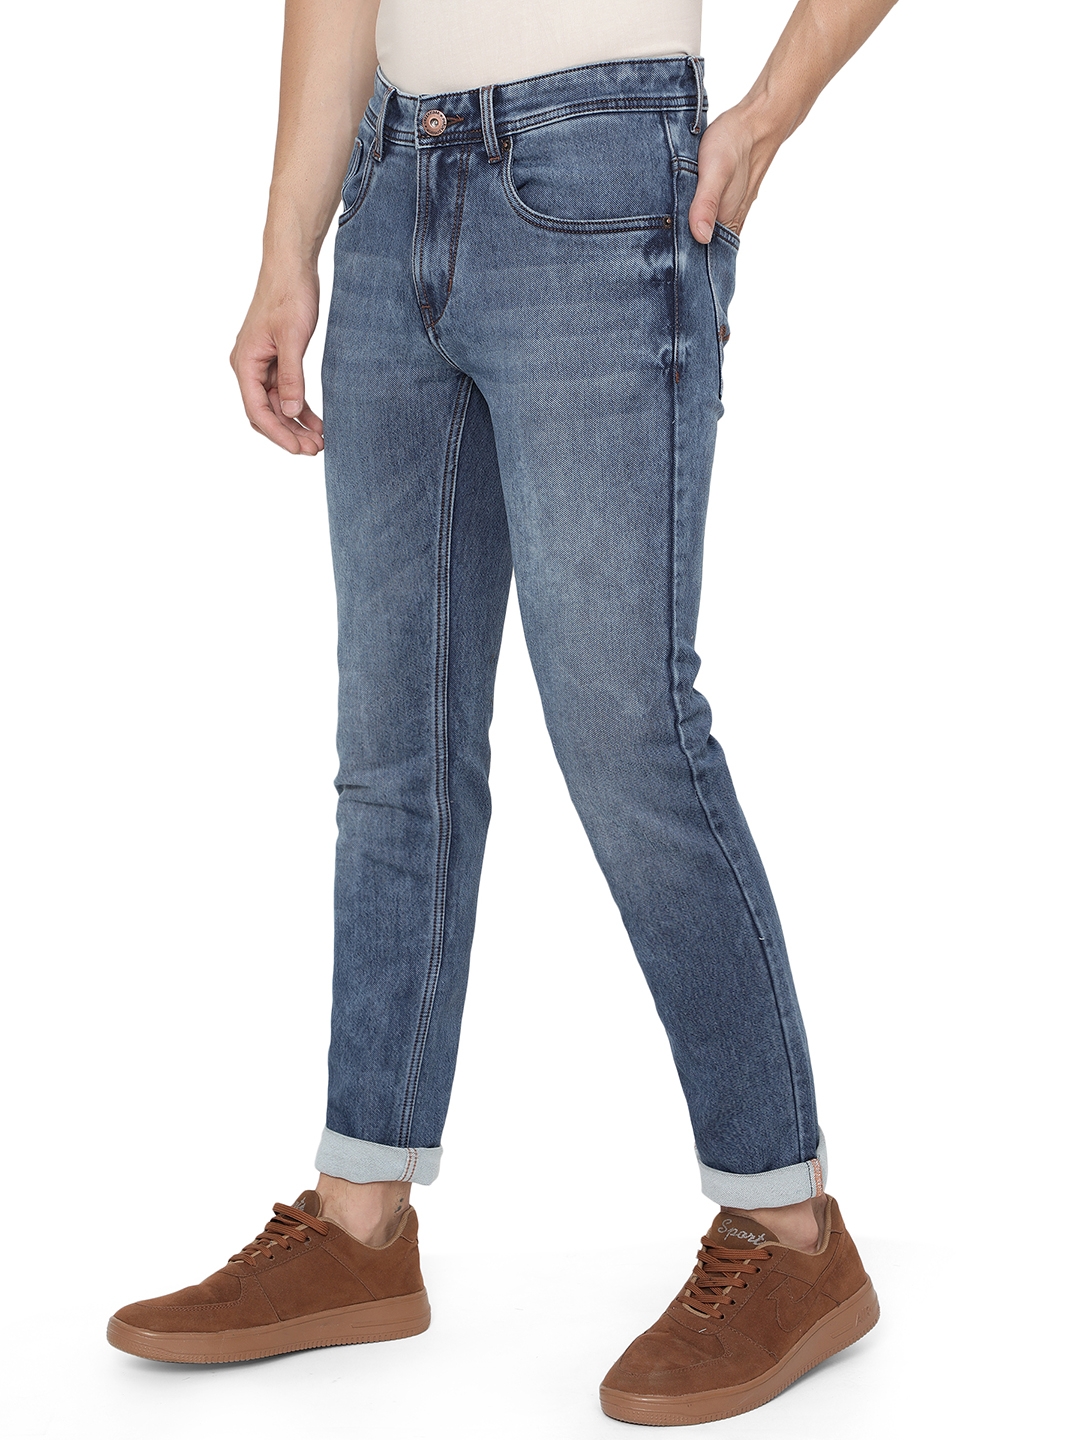 Greenfibre | Ink Blue Washed Narrow Fit Jeans | Greenfibre 1